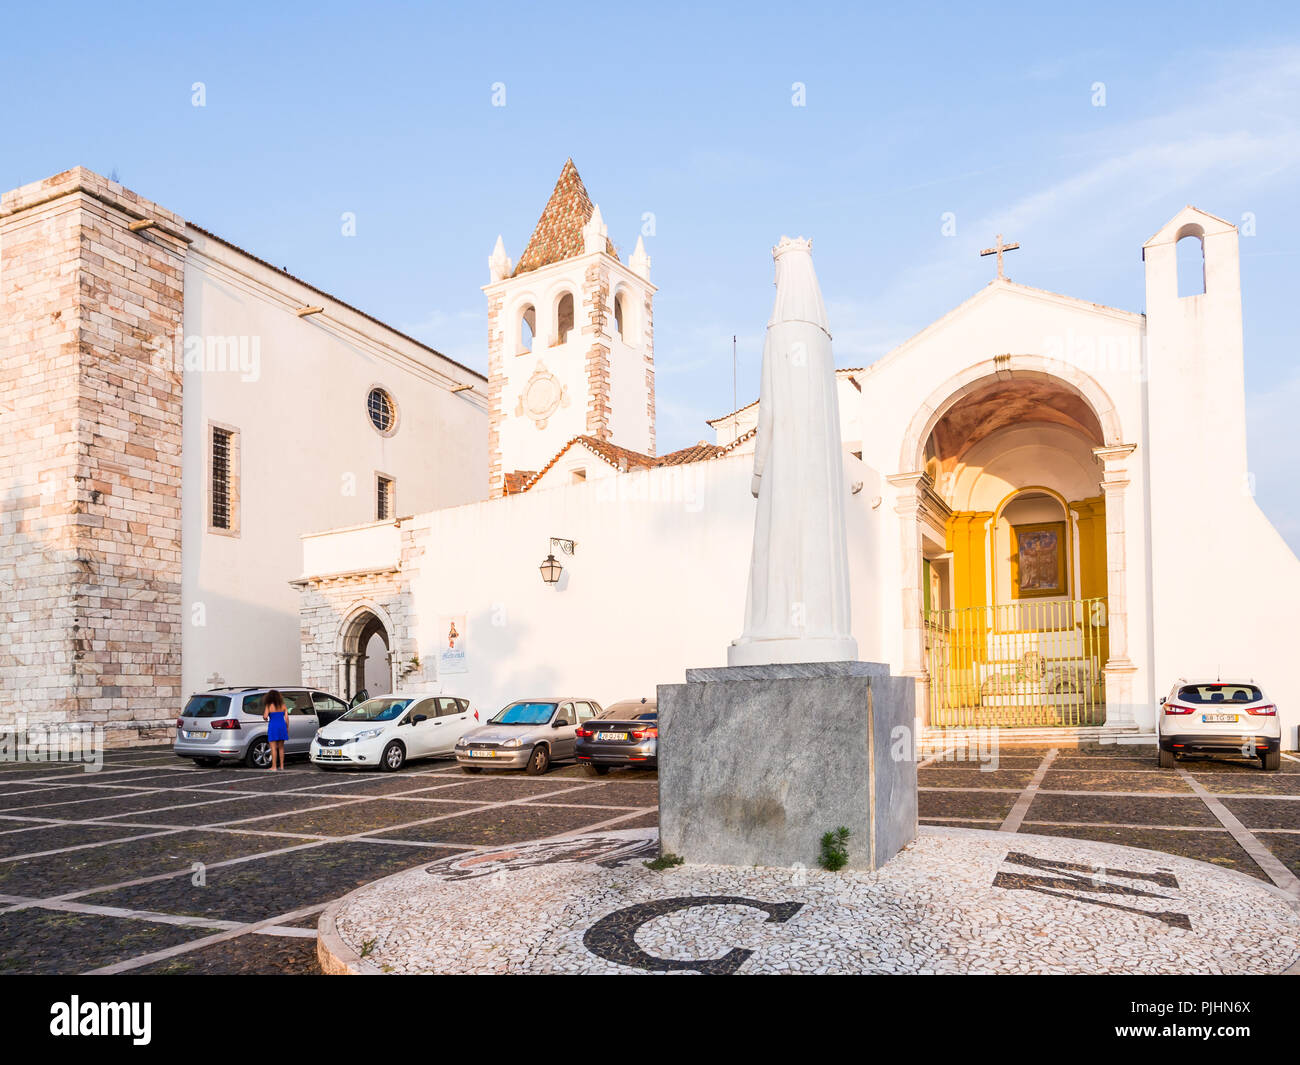 ESTREMOZ, PORTUGAL – AUGUST 23, 2018: Nosso Senhor dos Inocentes church with  Statue of Rainha Santa Isabel in front of it in Estremoz, Portugal. Stock Photo